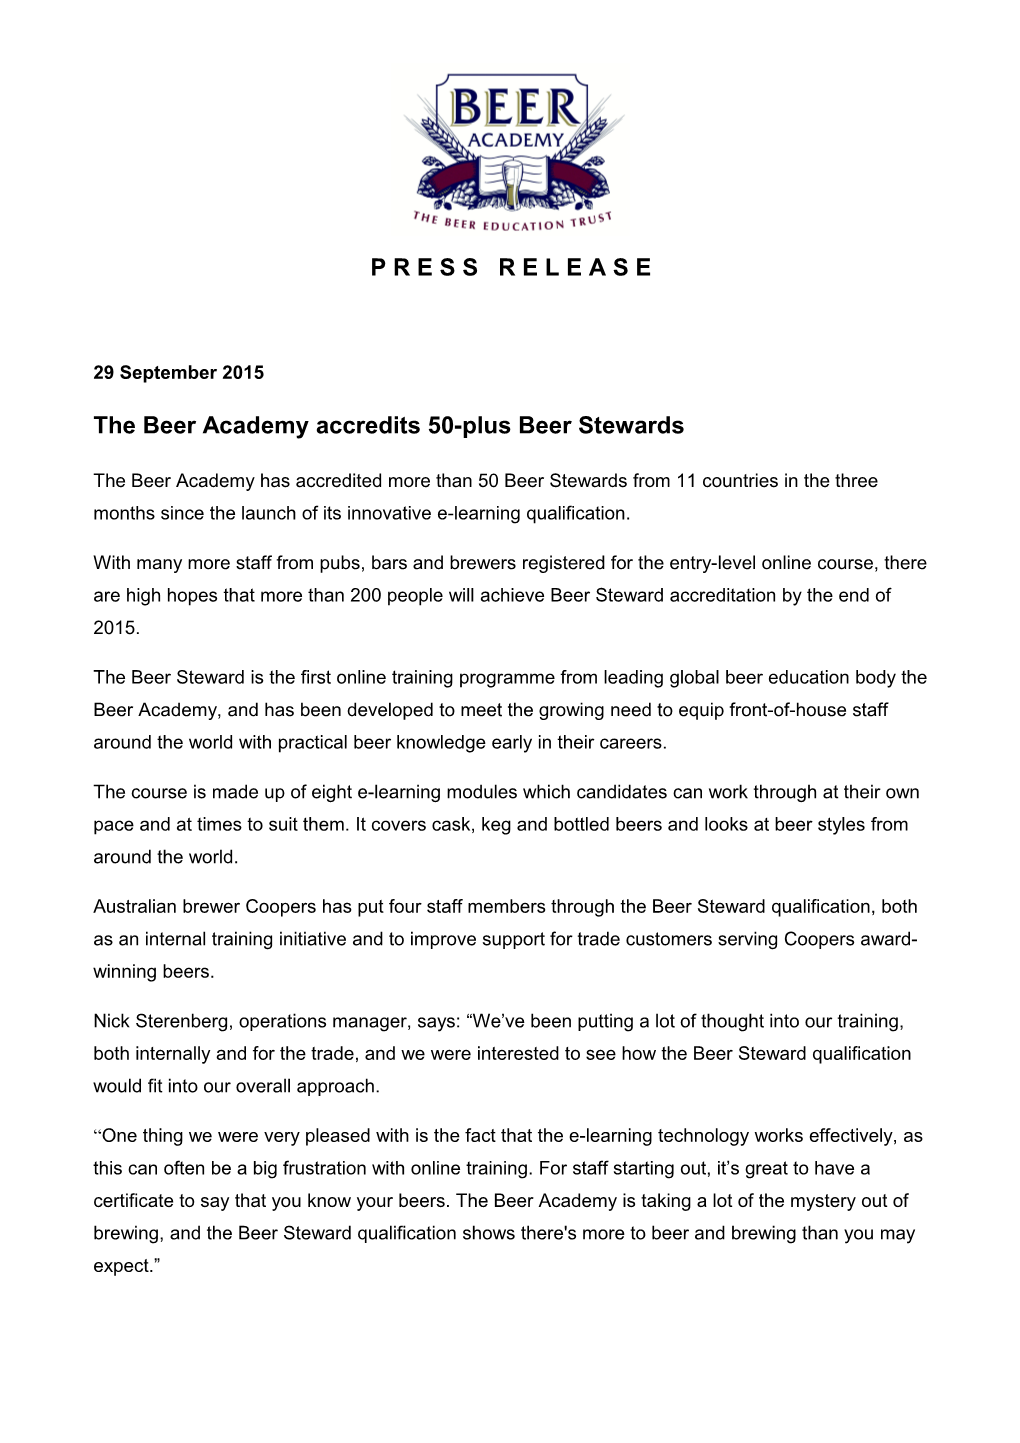 The Beer Academy Accredits 50-Plus Beer Stewards